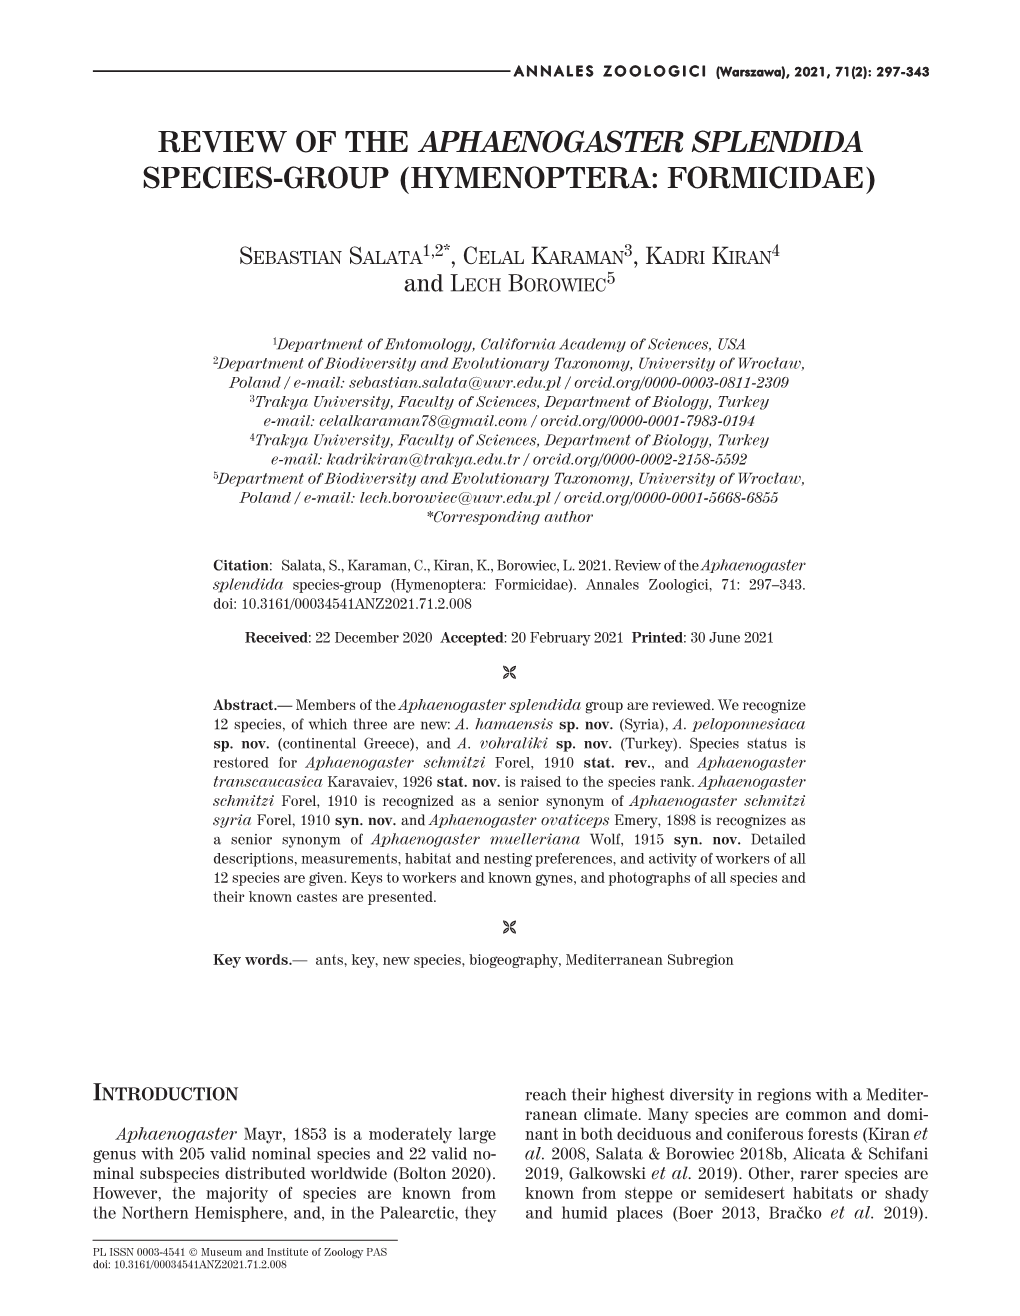 Review of the Aphaenogaster Splendida Species-Group (Hymenoptera: Formicidae)